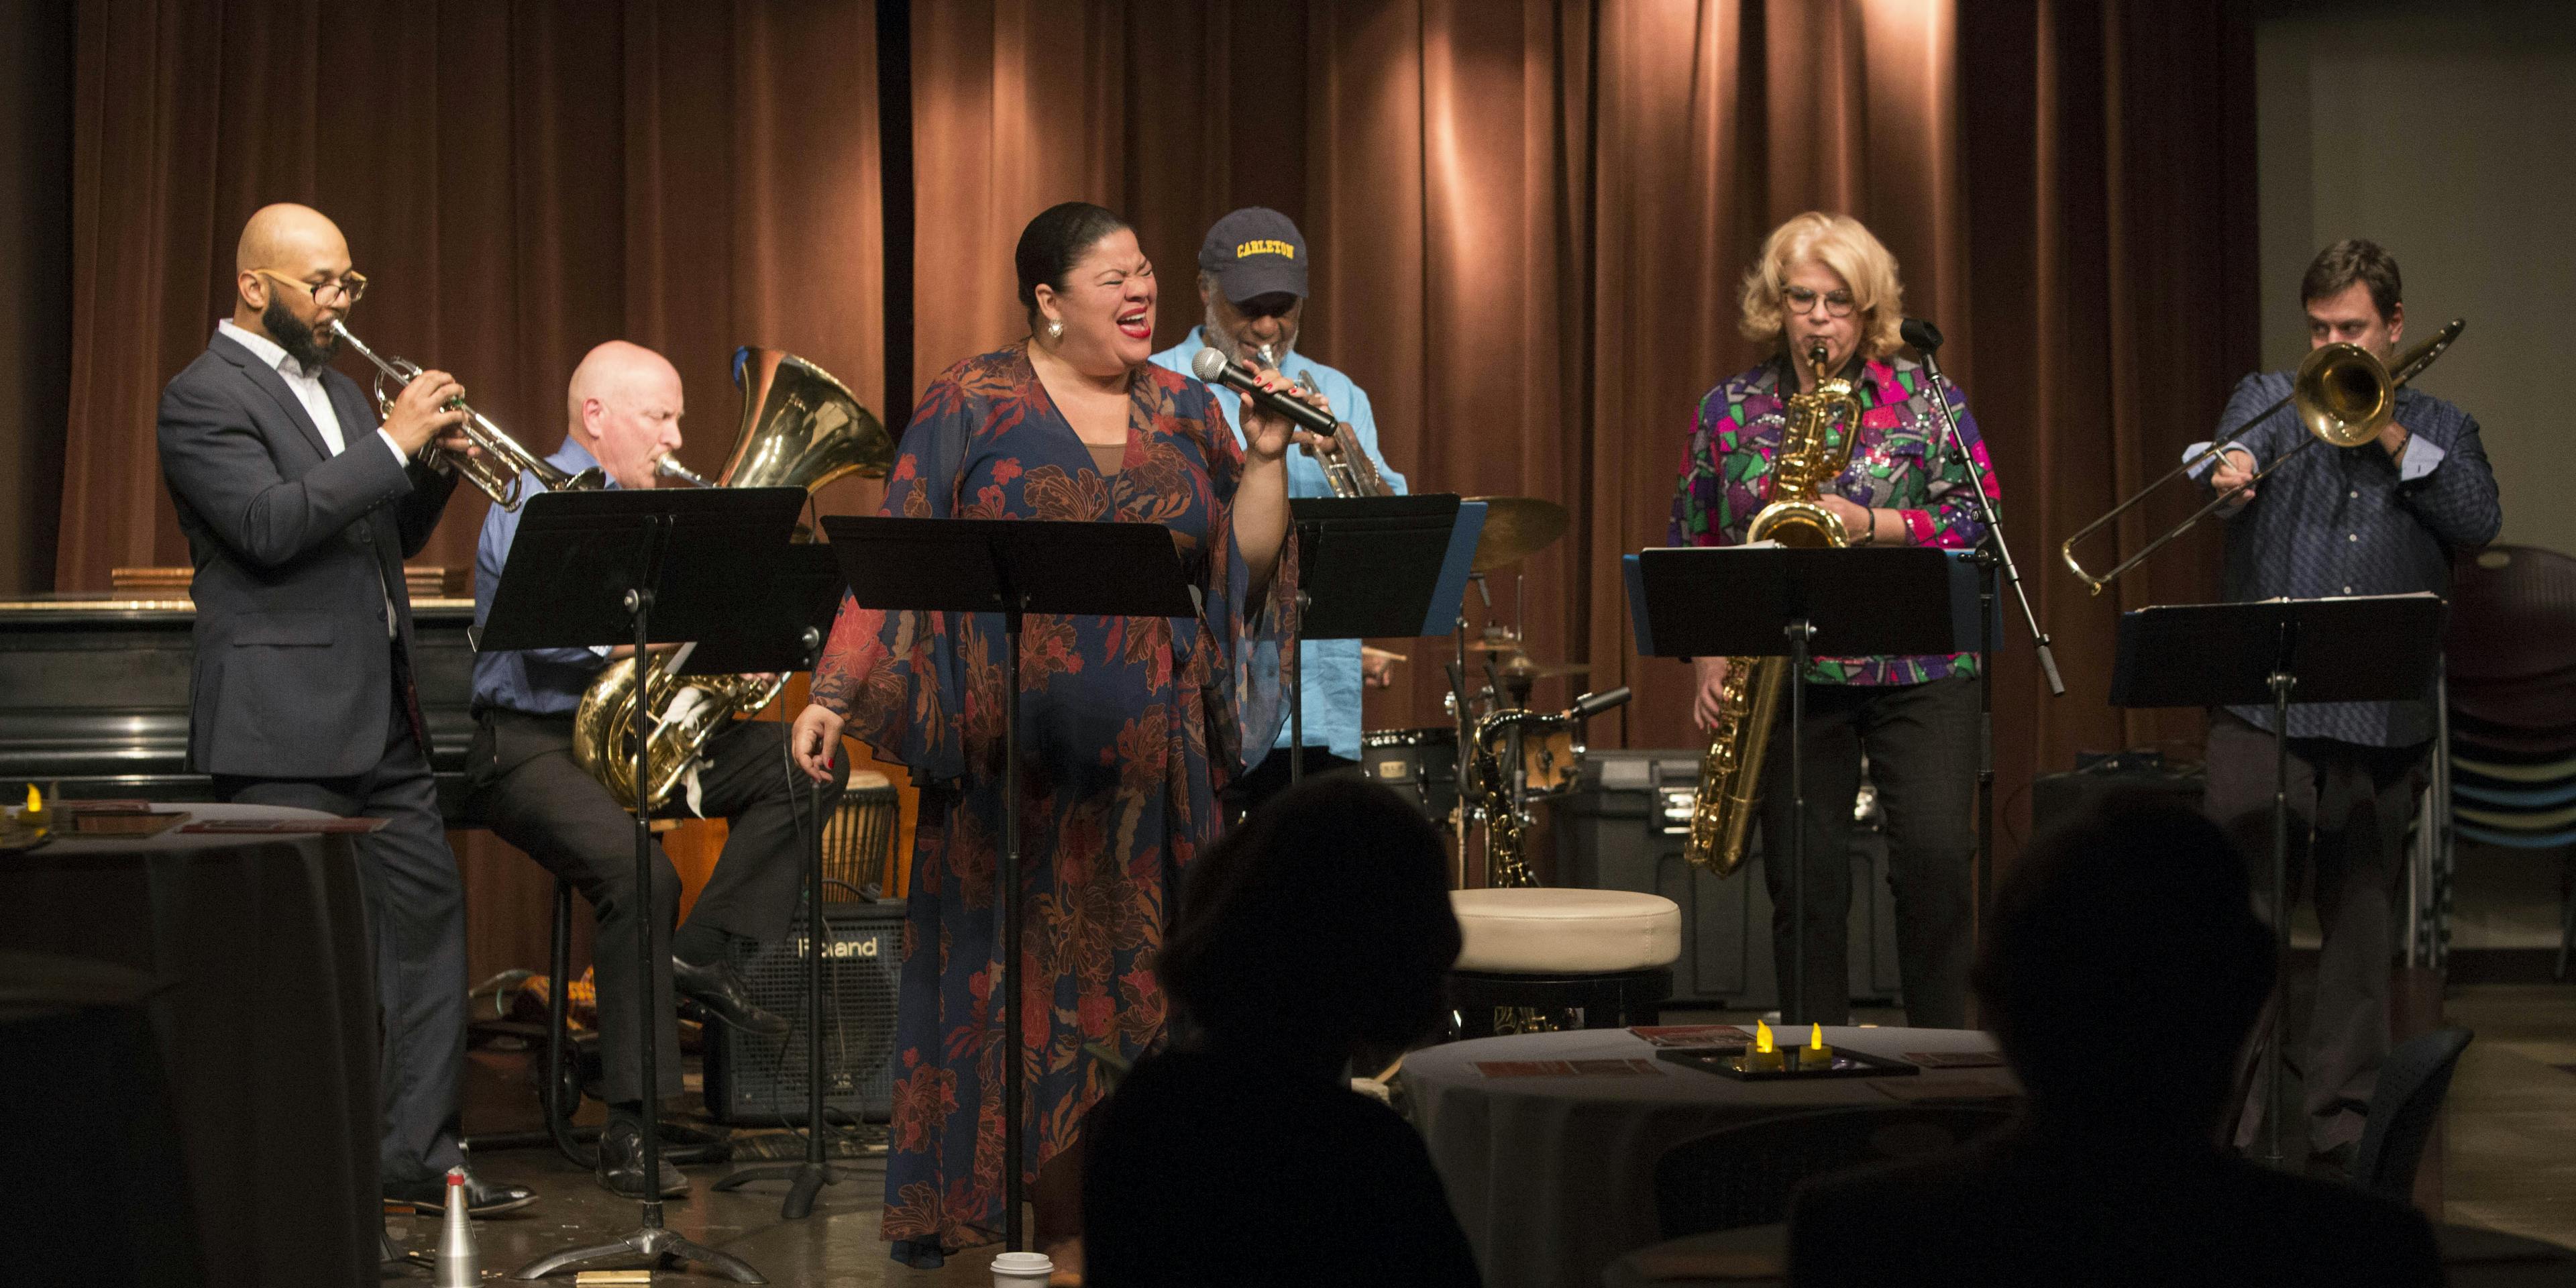 Selby Avenue Brass Band ft. Thomasina Petrus and Mychael Wright event cover photo